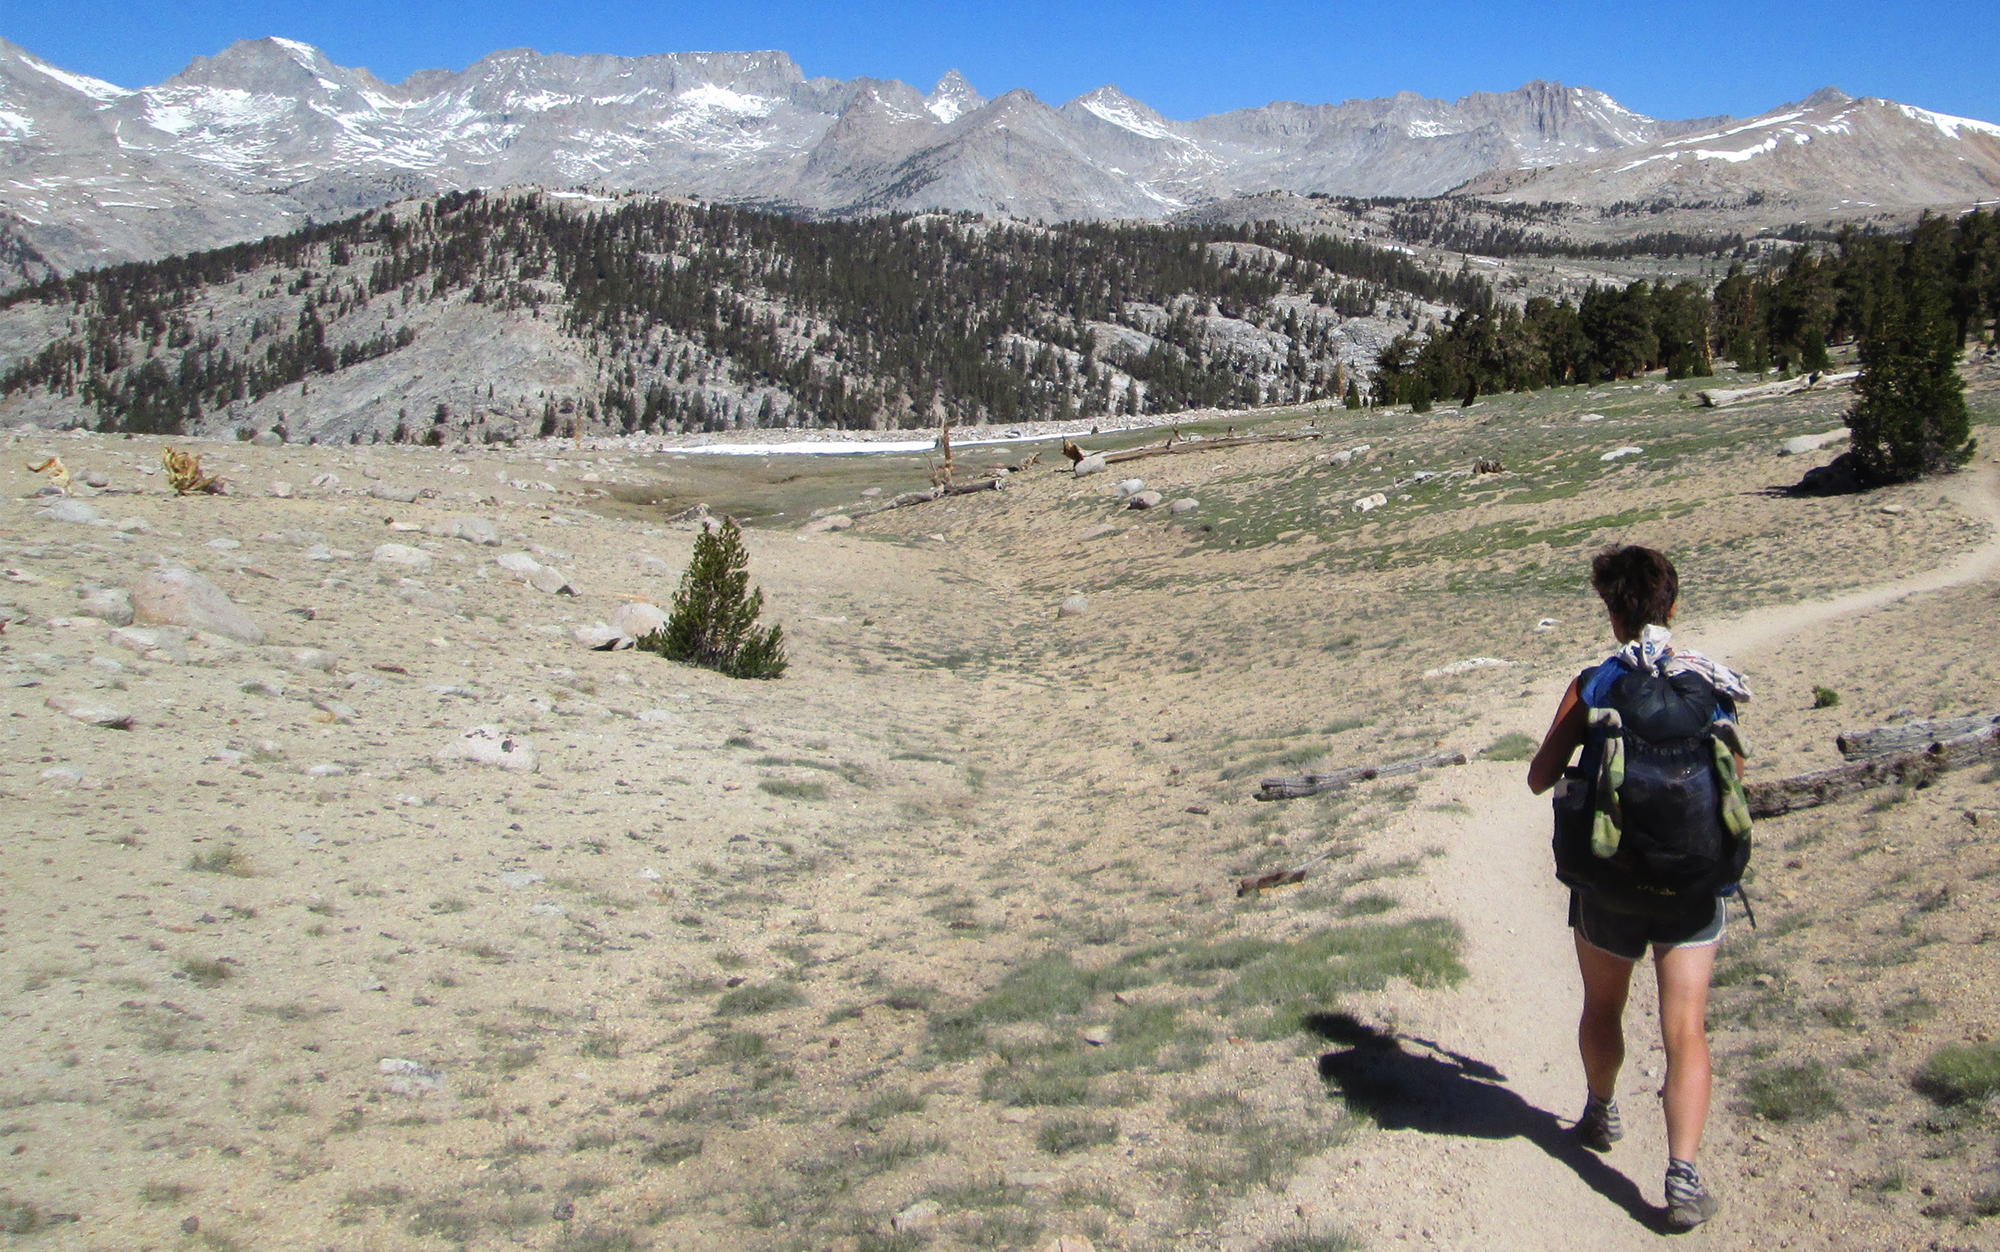 Hiking the Pacific Crest Trail takes you across some of the most iconic ranges of the western United States, including the High Sierra.